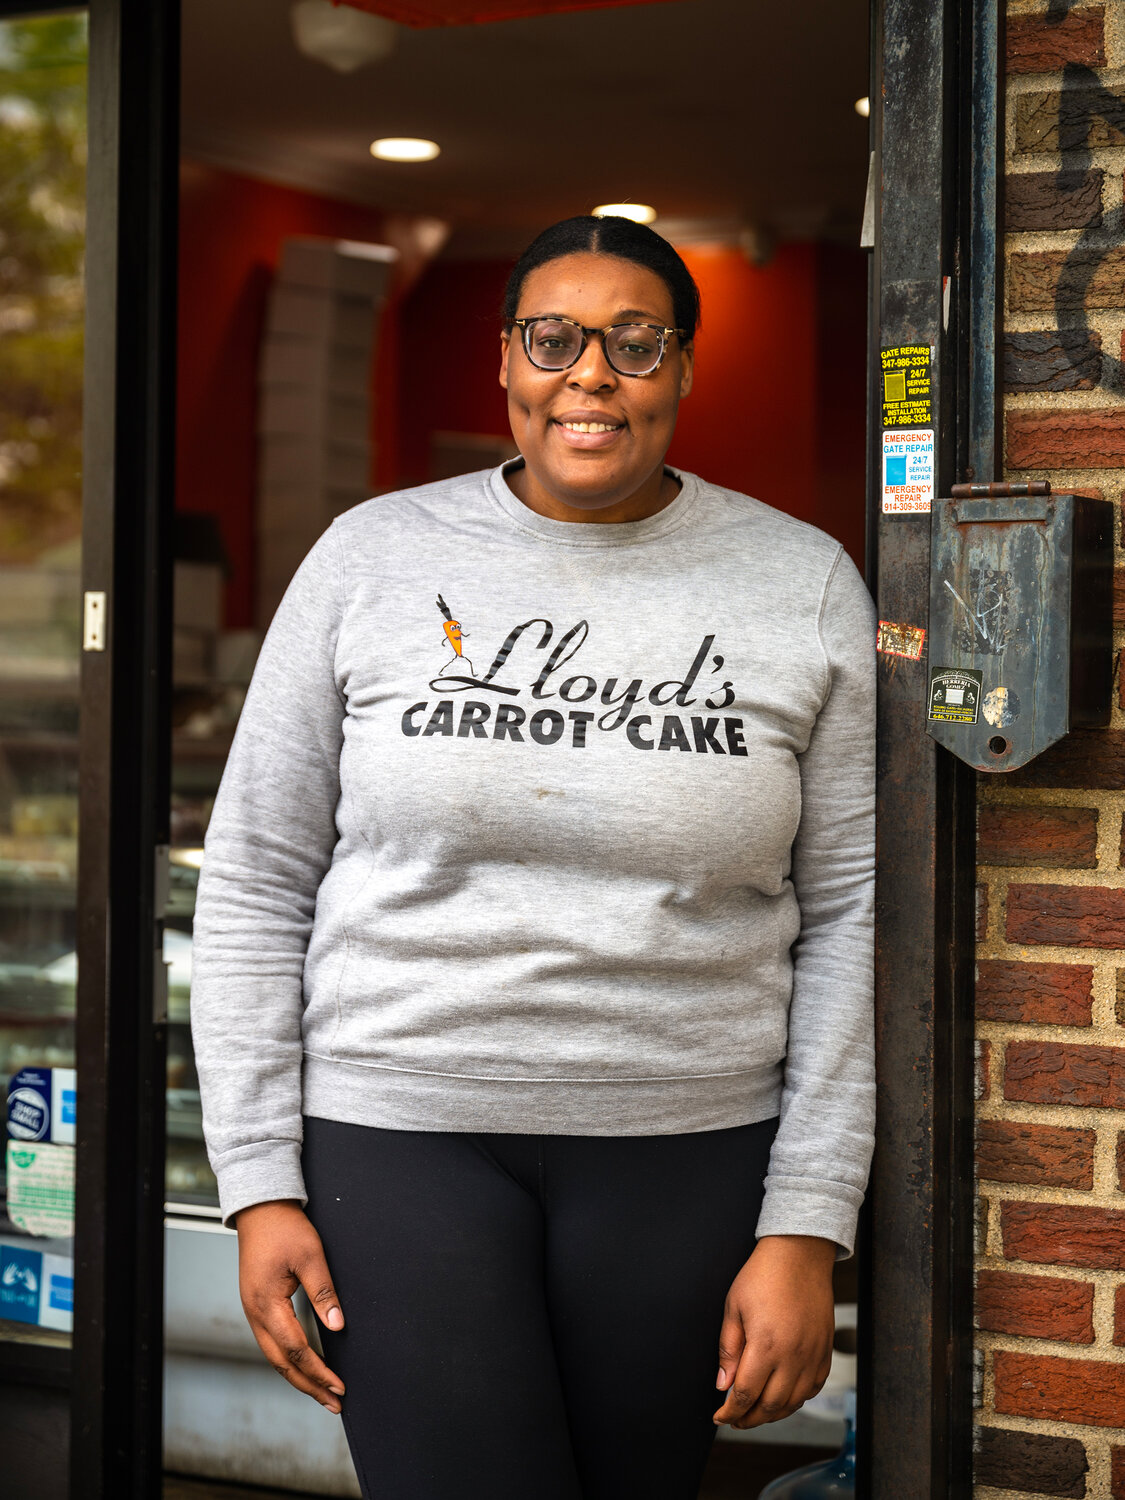 Lilka Adams works two full-time jobs as she tries to keep her parents’ legacy and name alive. She has plans to start one or two classes for children such as cupcake decorating.